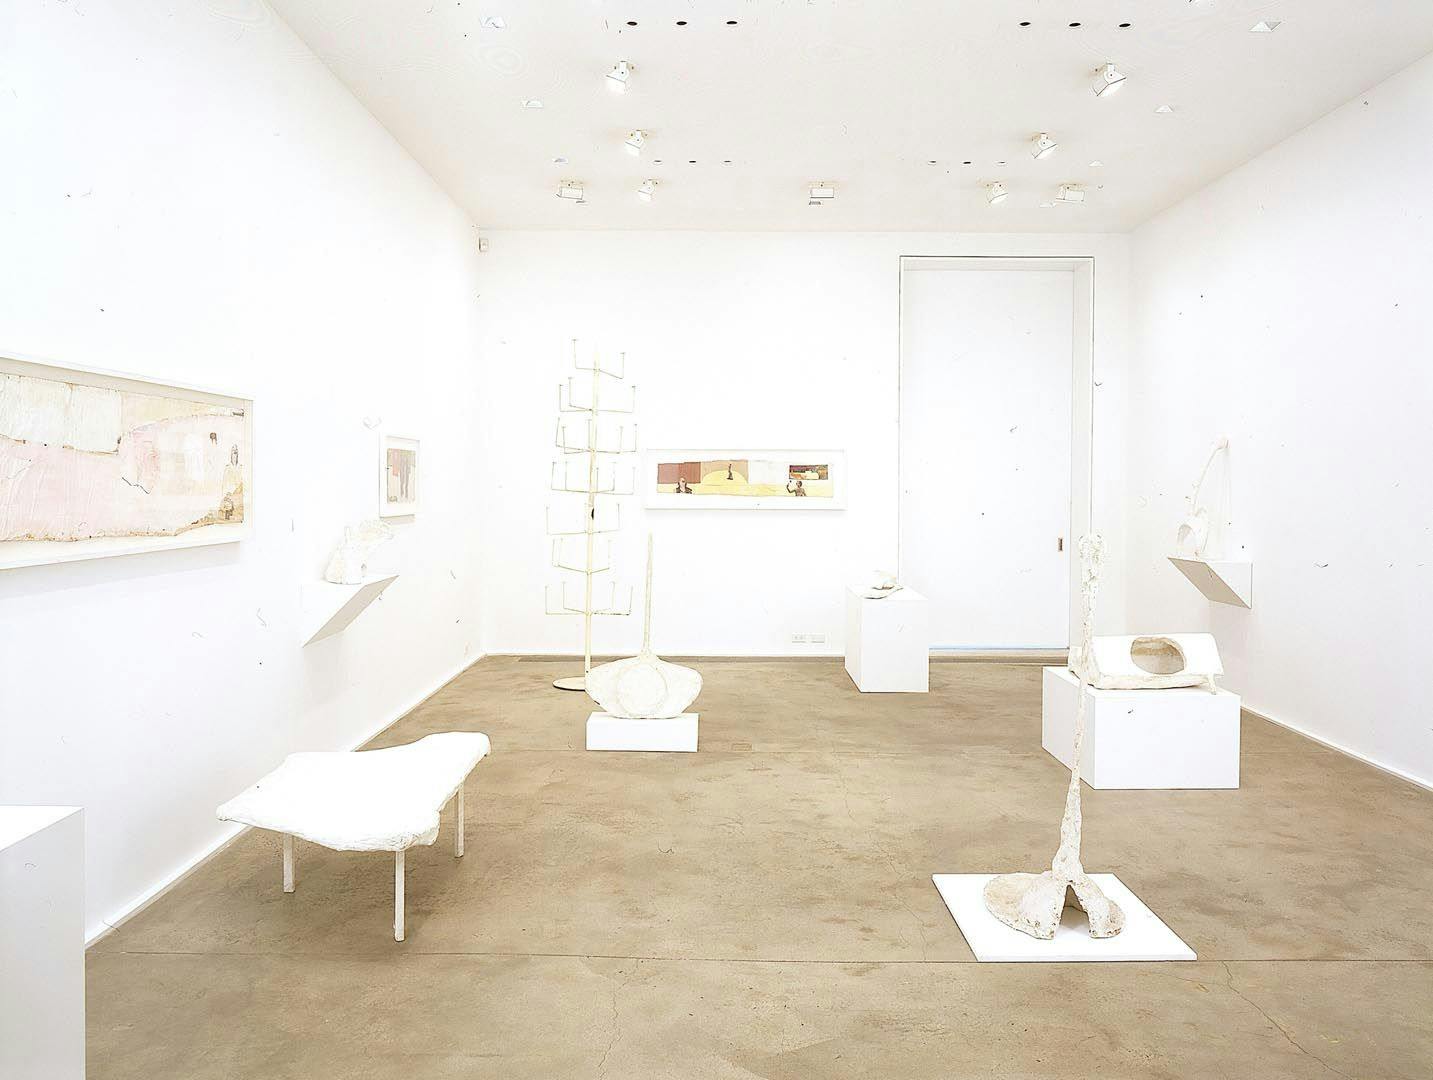 An installation view of the exhibition Franz West: Early Work, at David Zwirner New York, dated 2005.